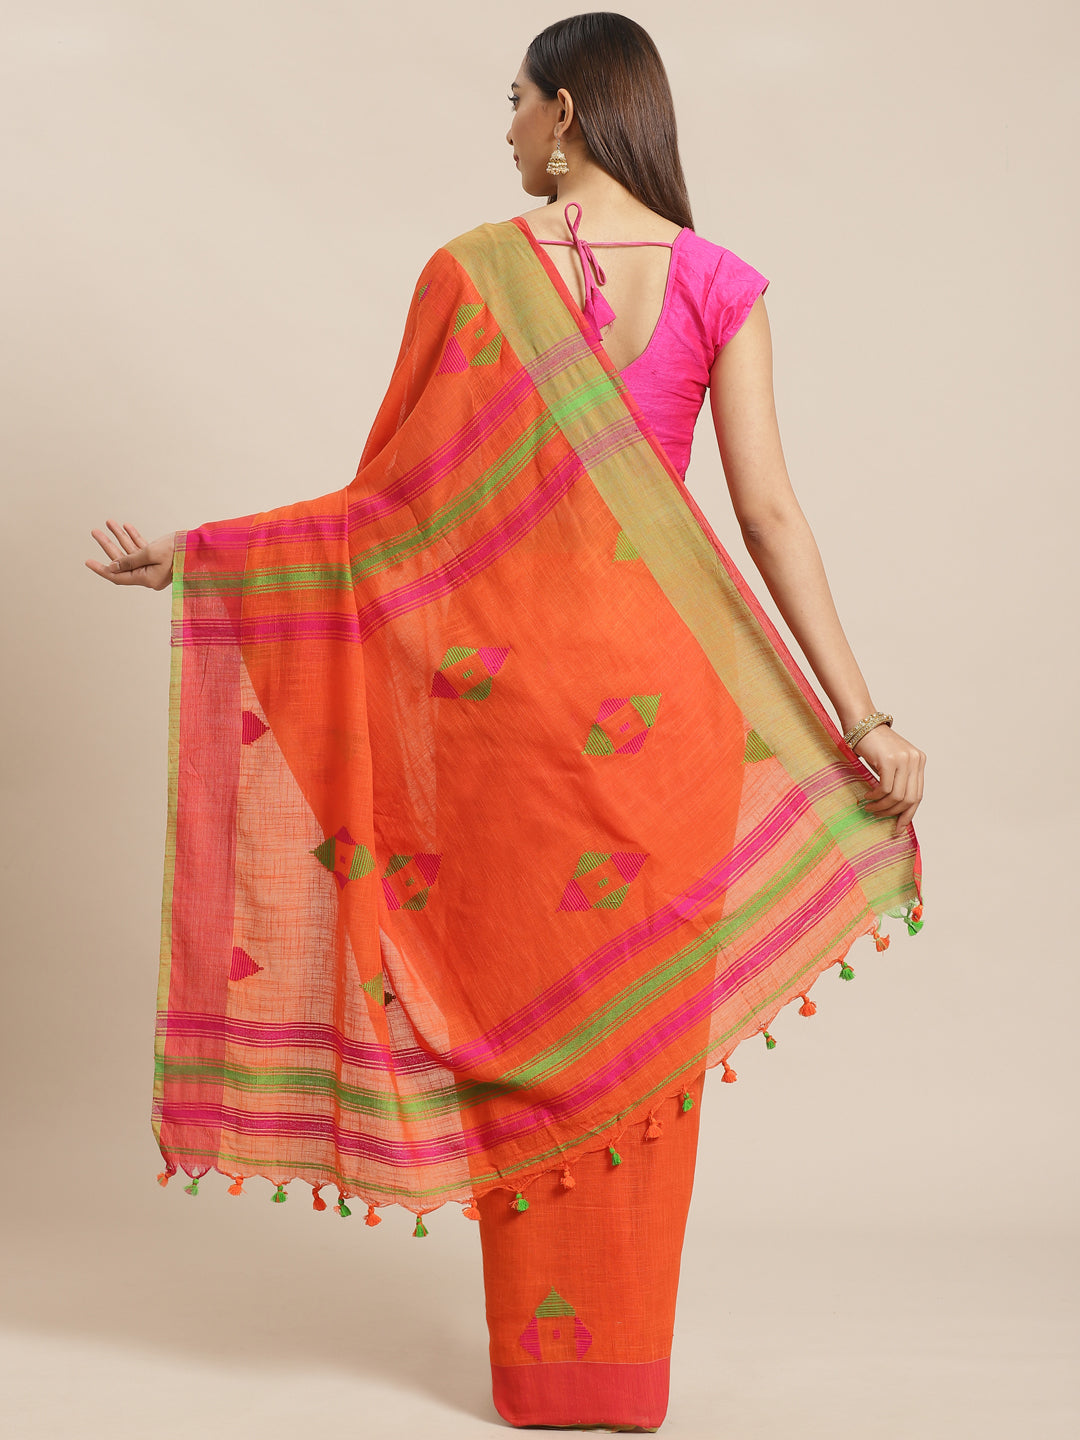 Orange and Green, Kalakari India Cotton Orange Hand crafted saree with blouse SHBESA0015-Saree-Kalakari India-SHBESA0015-Bengal, Cotton, Geographical Indication, Hand Crafted, Heritage Prints, Ikkat, Natural Dyes, Red, Sarees, Sustainable Fabrics, Woven, Yellow-[Linen,Ethnic,wear,Fashionista,Handloom,Handicraft,Indigo,blockprint,block,print,Cotton,Chanderi,Blue, latest,classy,party,bollywood,trendy,summer,style,traditional,formal,elegant,unique,style,hand,block,print, dabu,booti,gift,present,gla